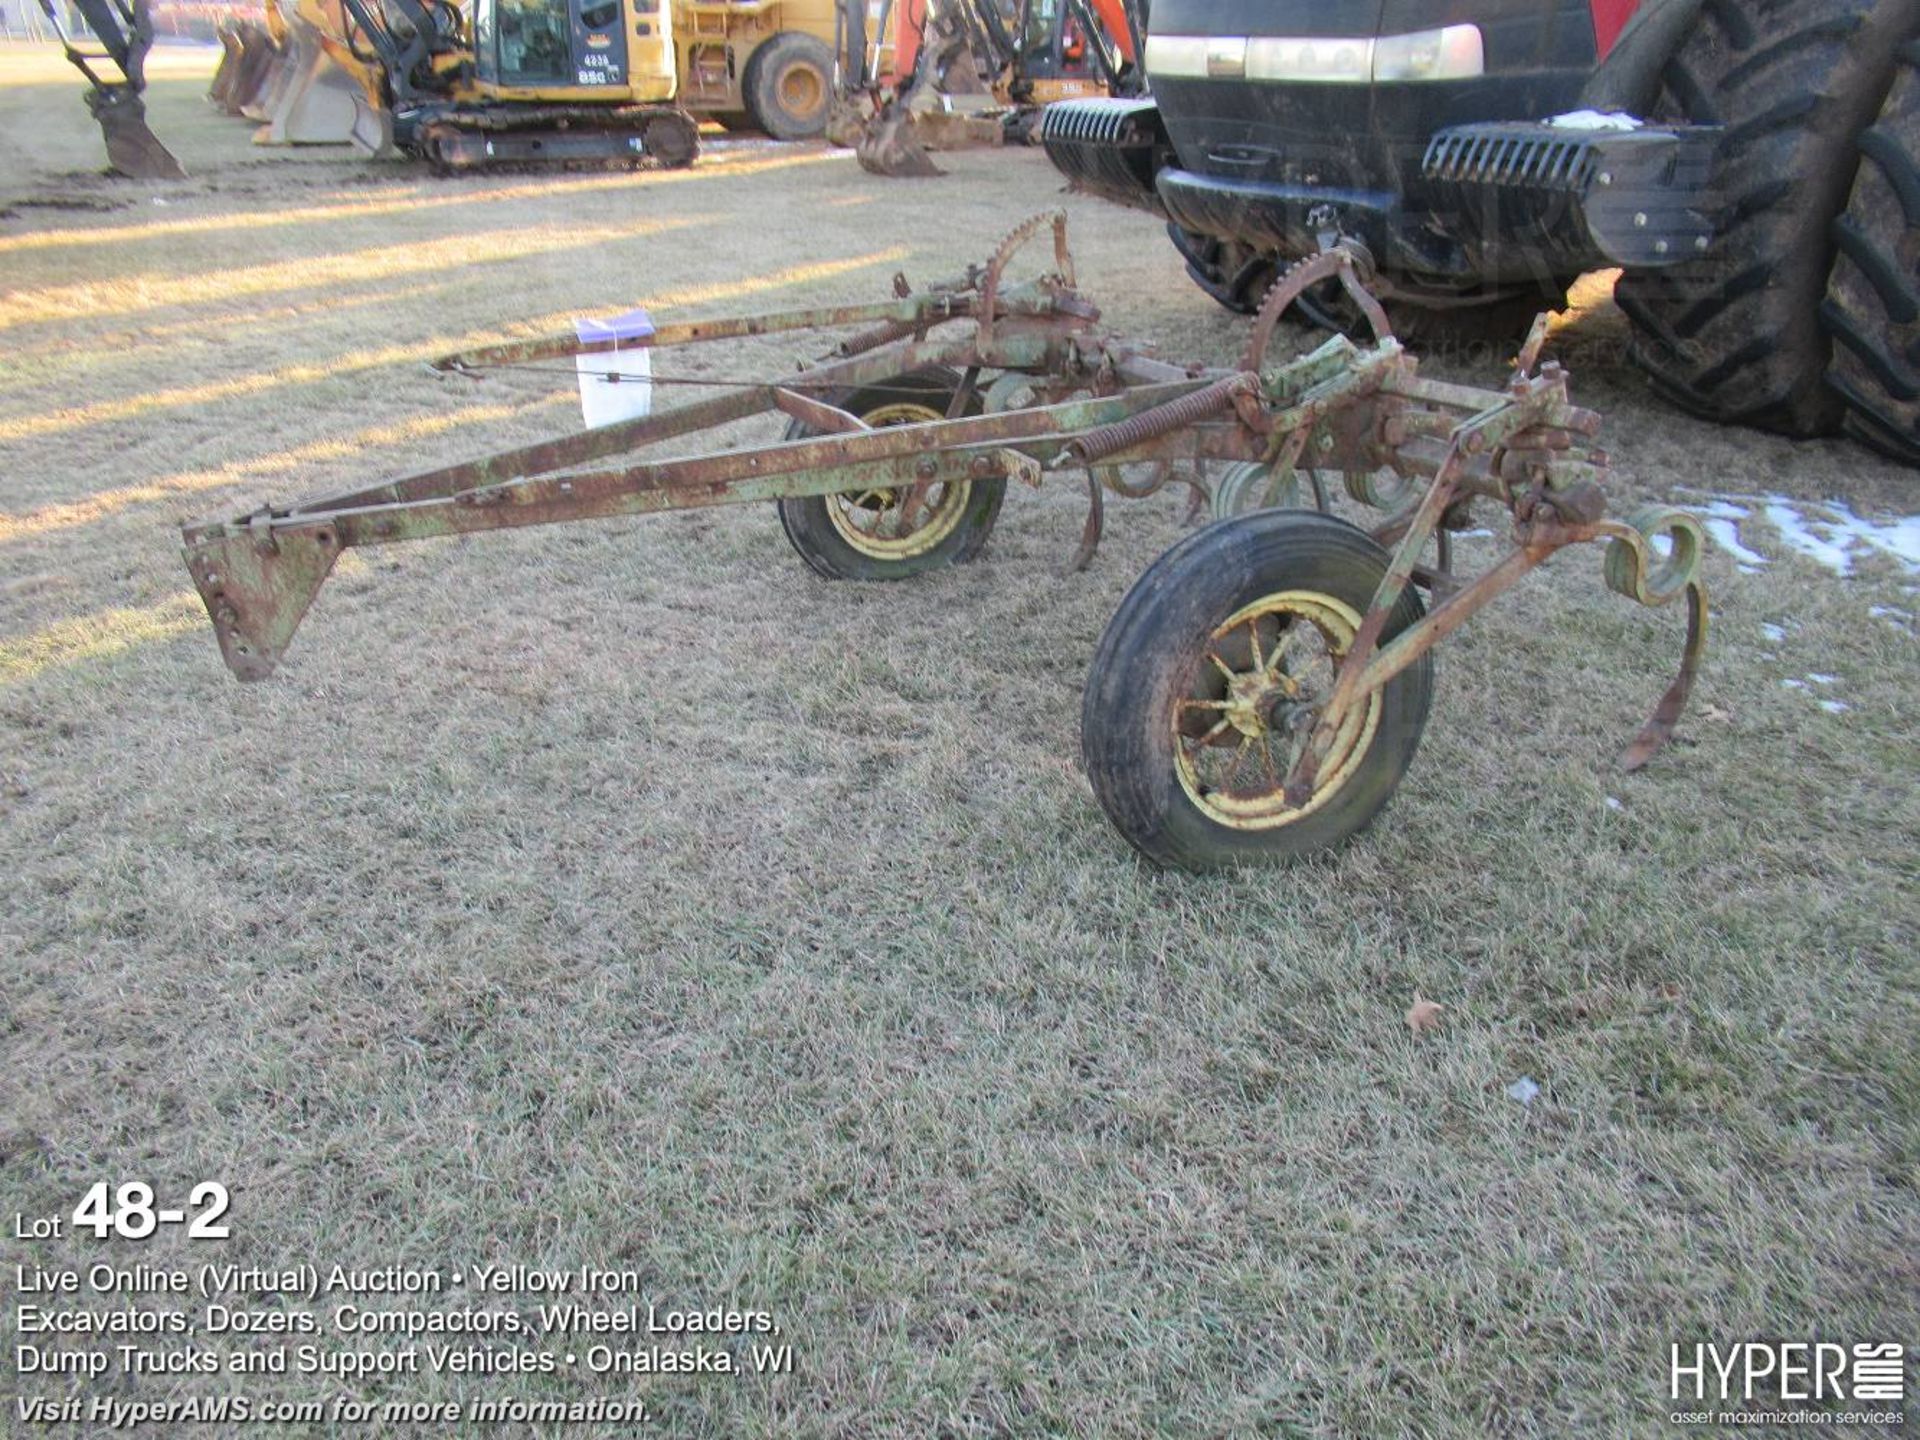 pull-type tine cultivator - Image 2 of 3